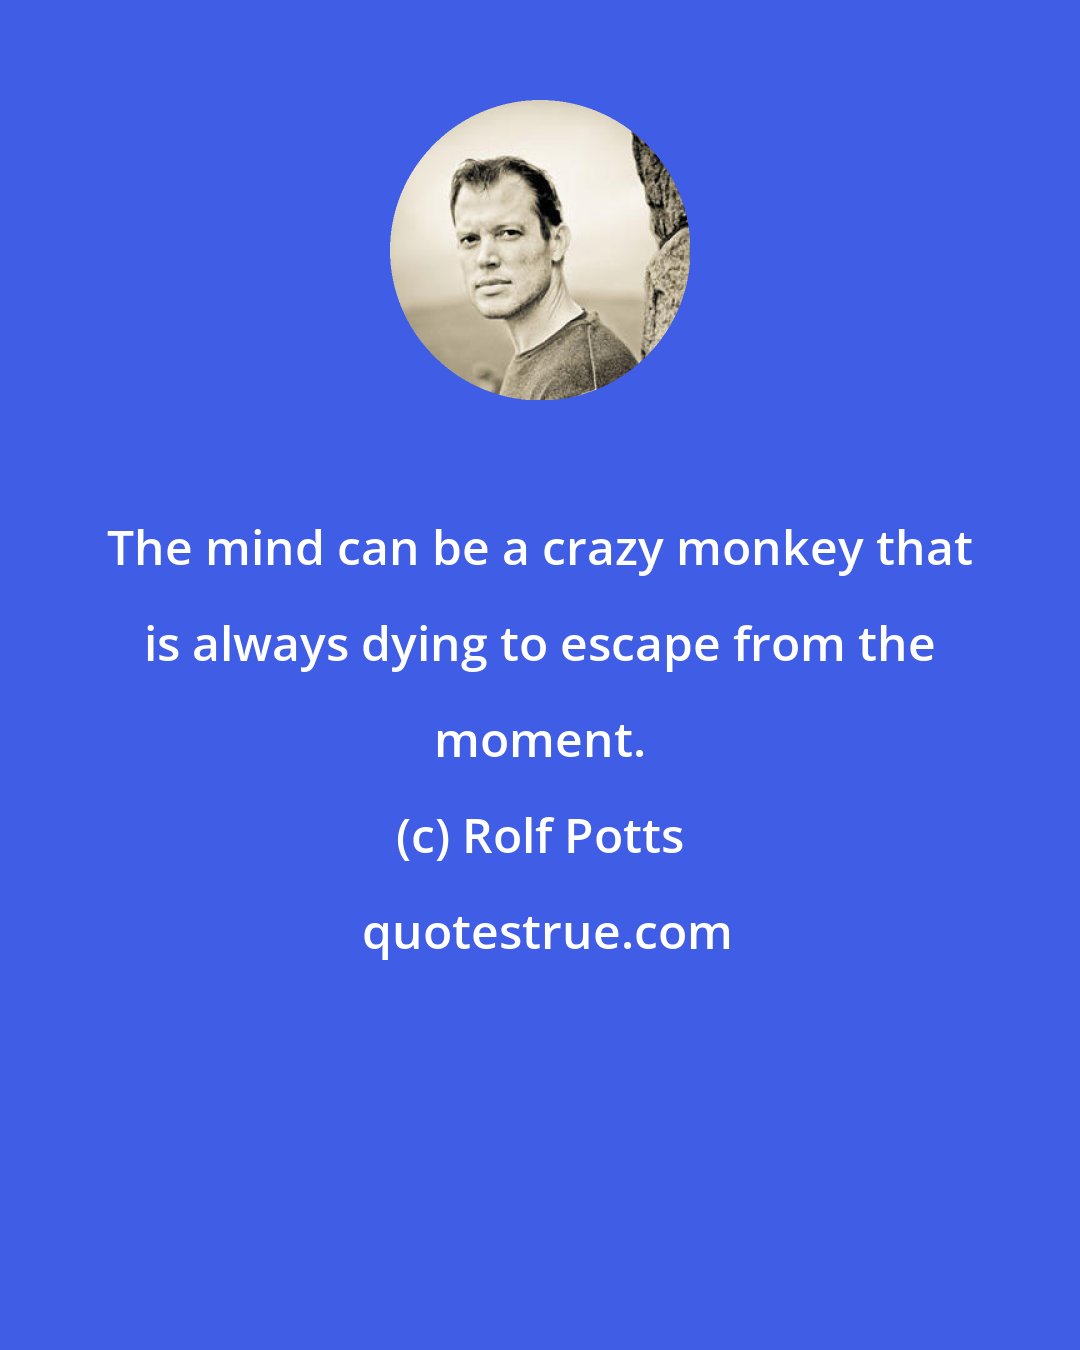 Rolf Potts: The mind can be a crazy monkey that is always dying to escape from the moment.